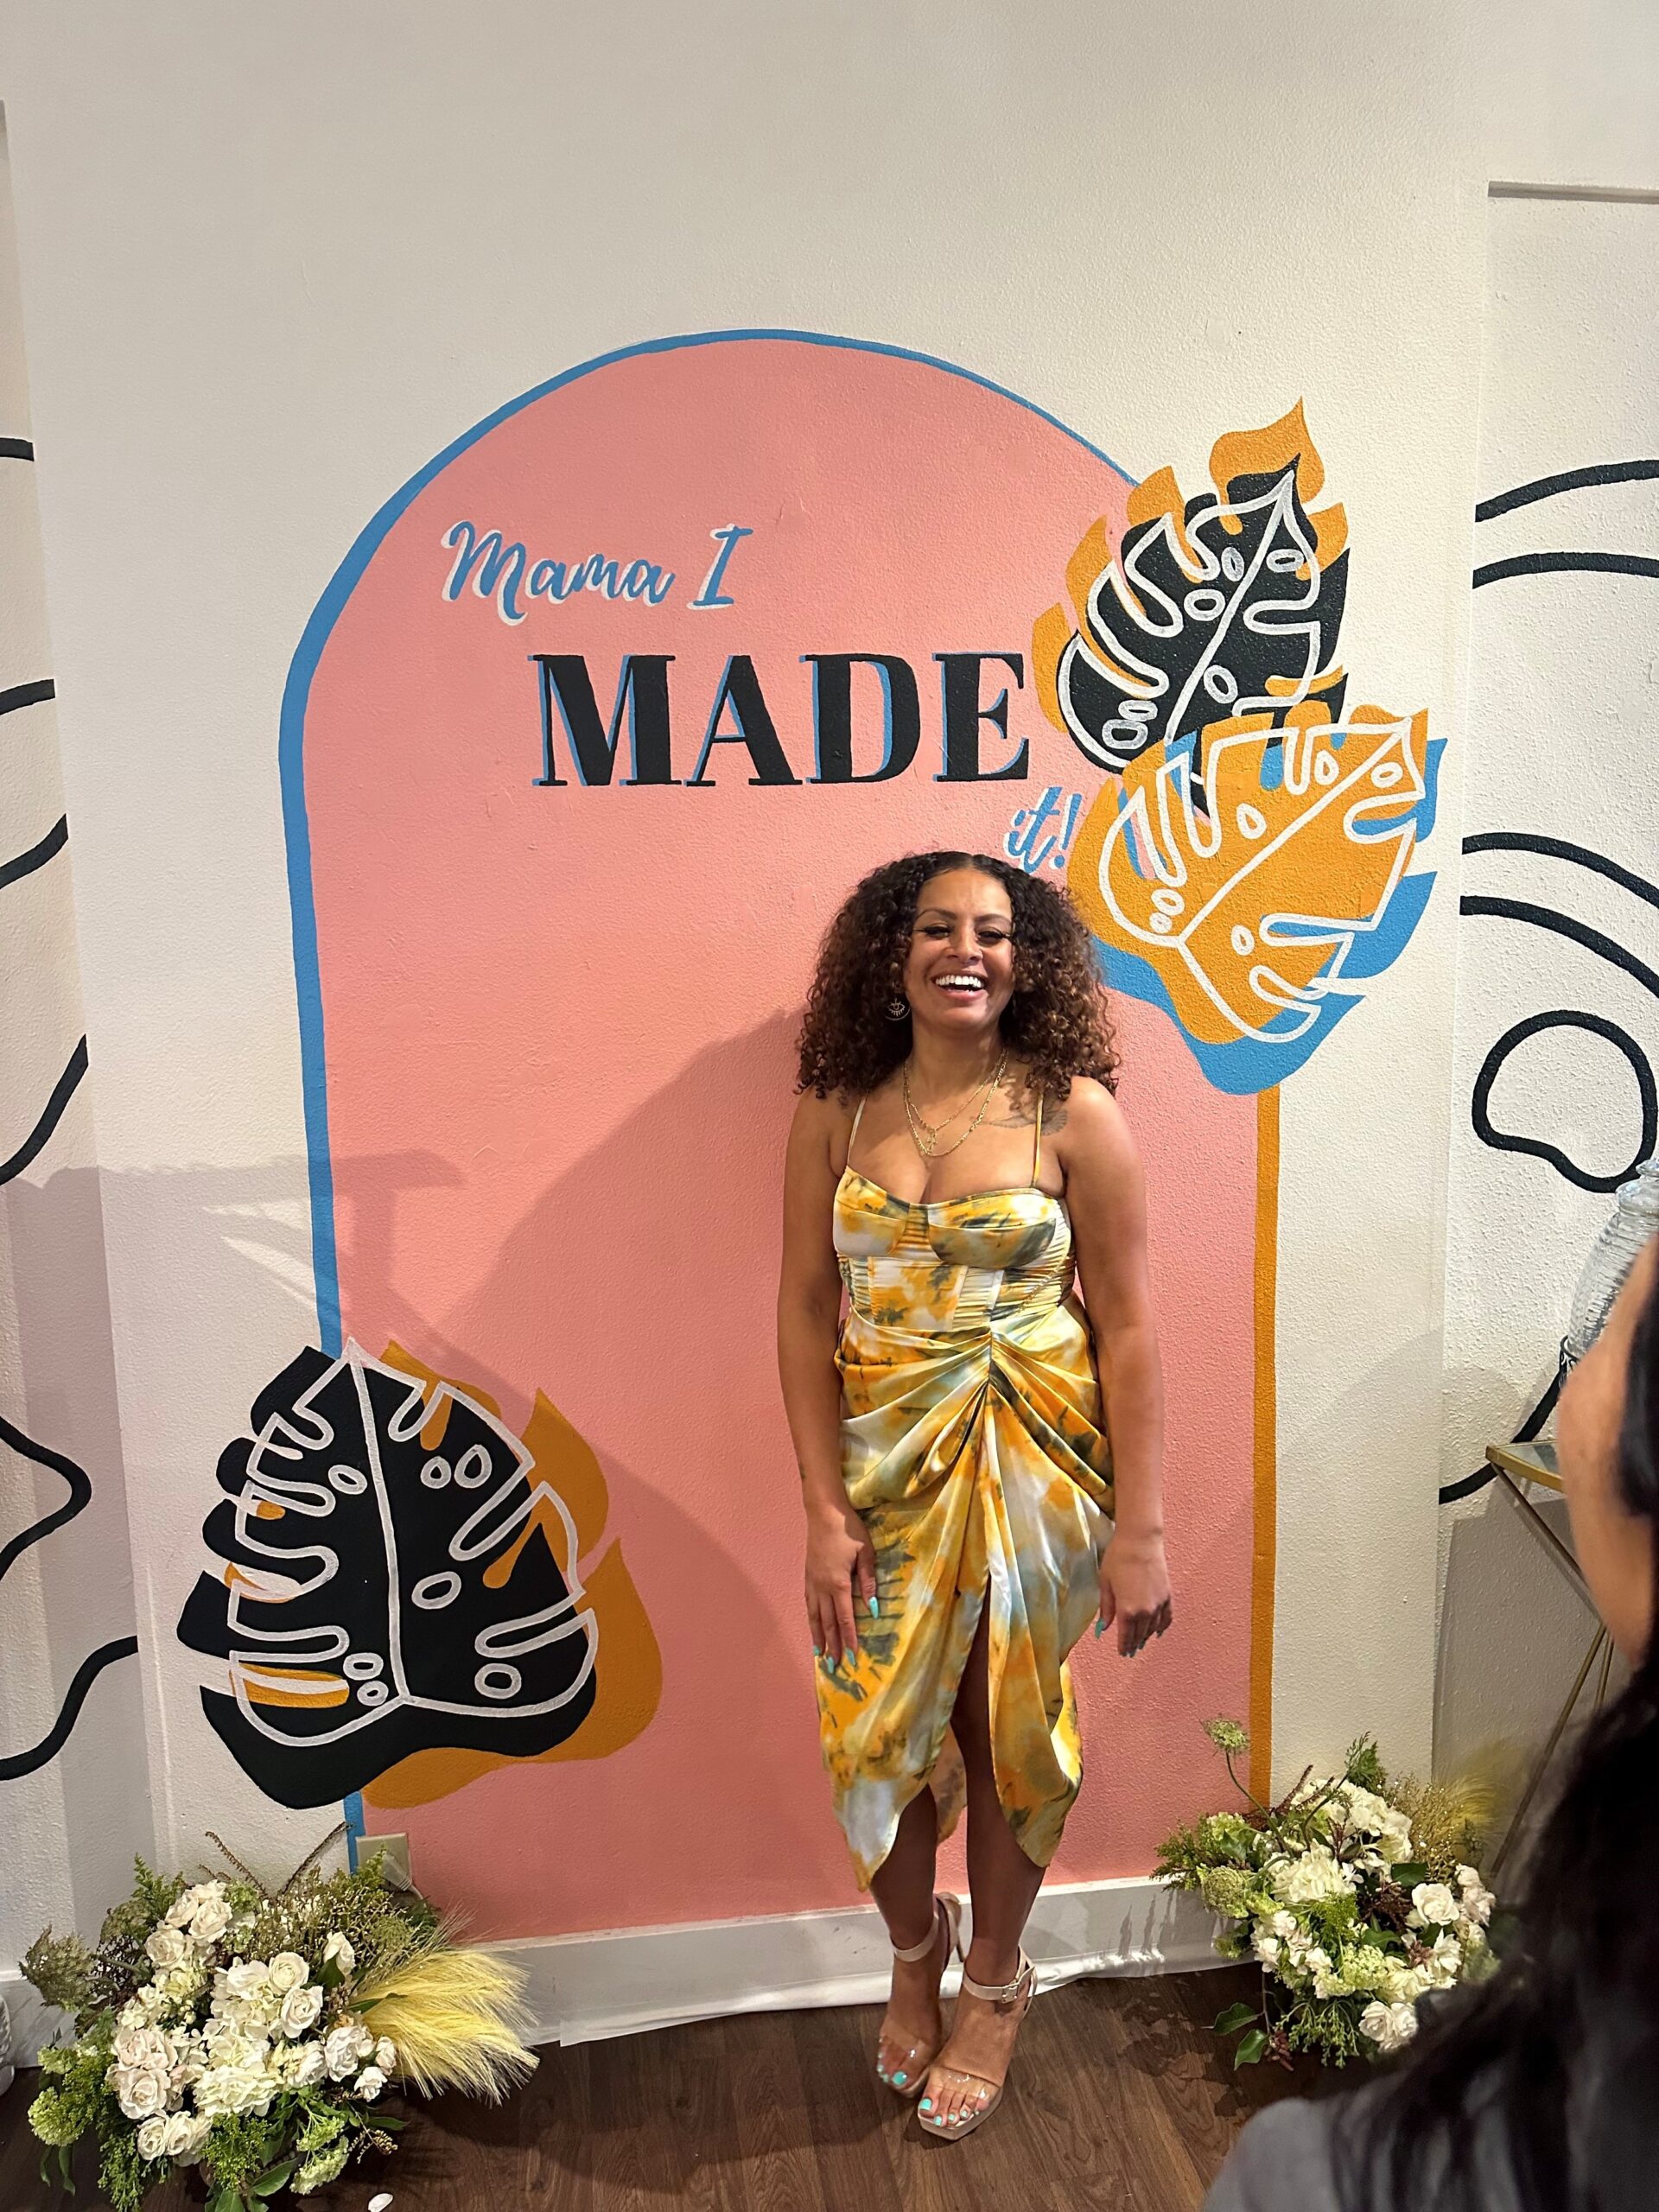 A Black woman wearing a yellow dress and heals stands in front of a sign with painted fern leaves and text that reads "Mama I MADE it!" 